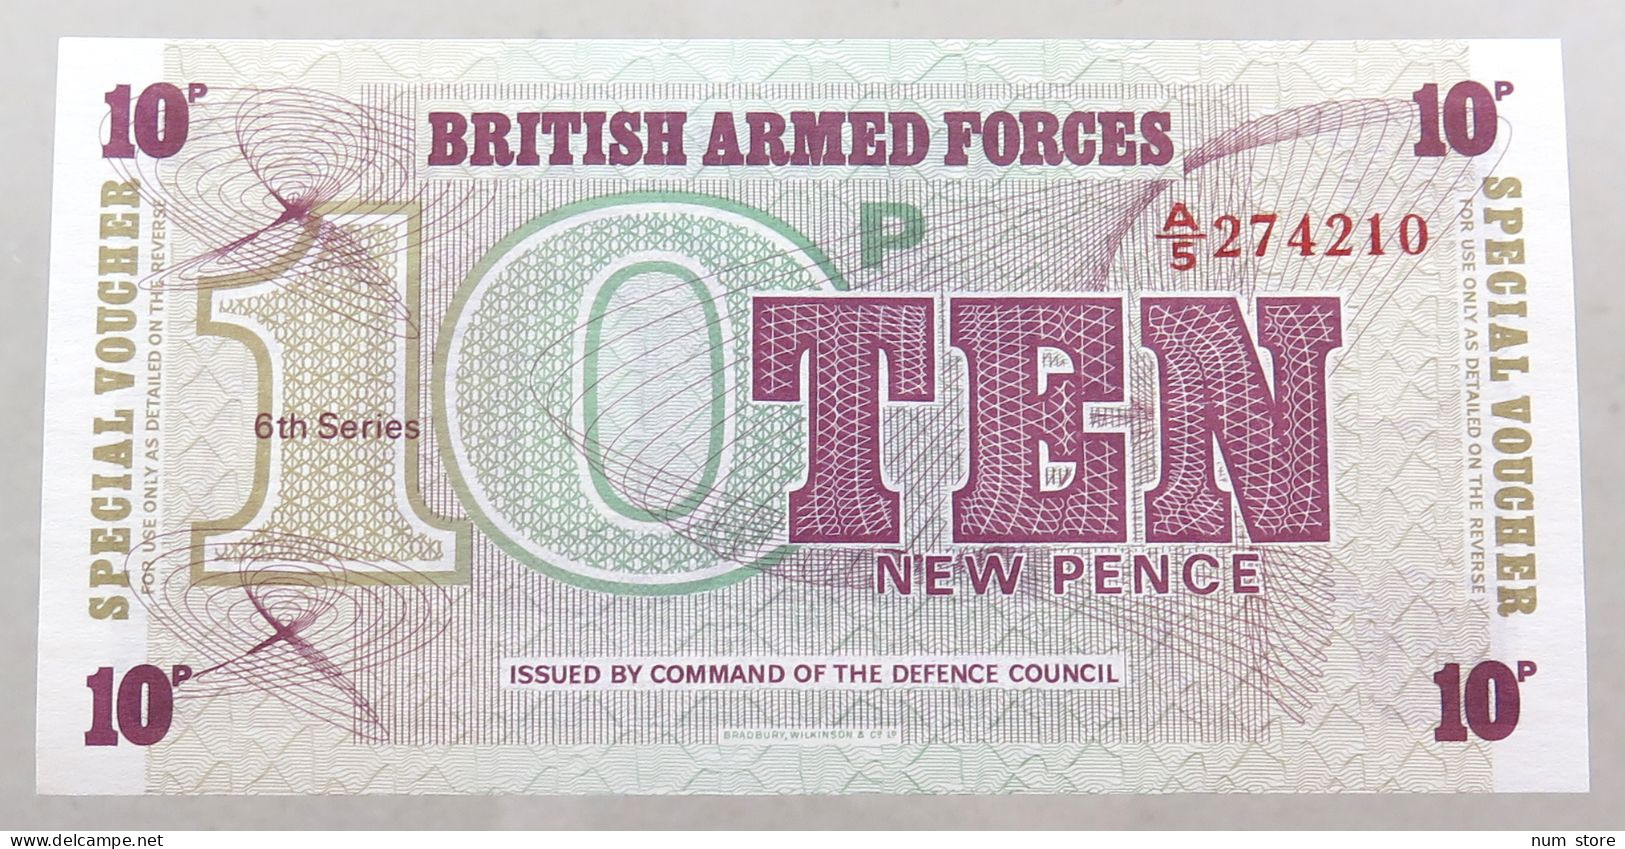 GREAT BRITAIN 10 PENCE BRITISH ARMED FORCES TOP #alb049 0131 - British Armed Forces & Special Vouchers